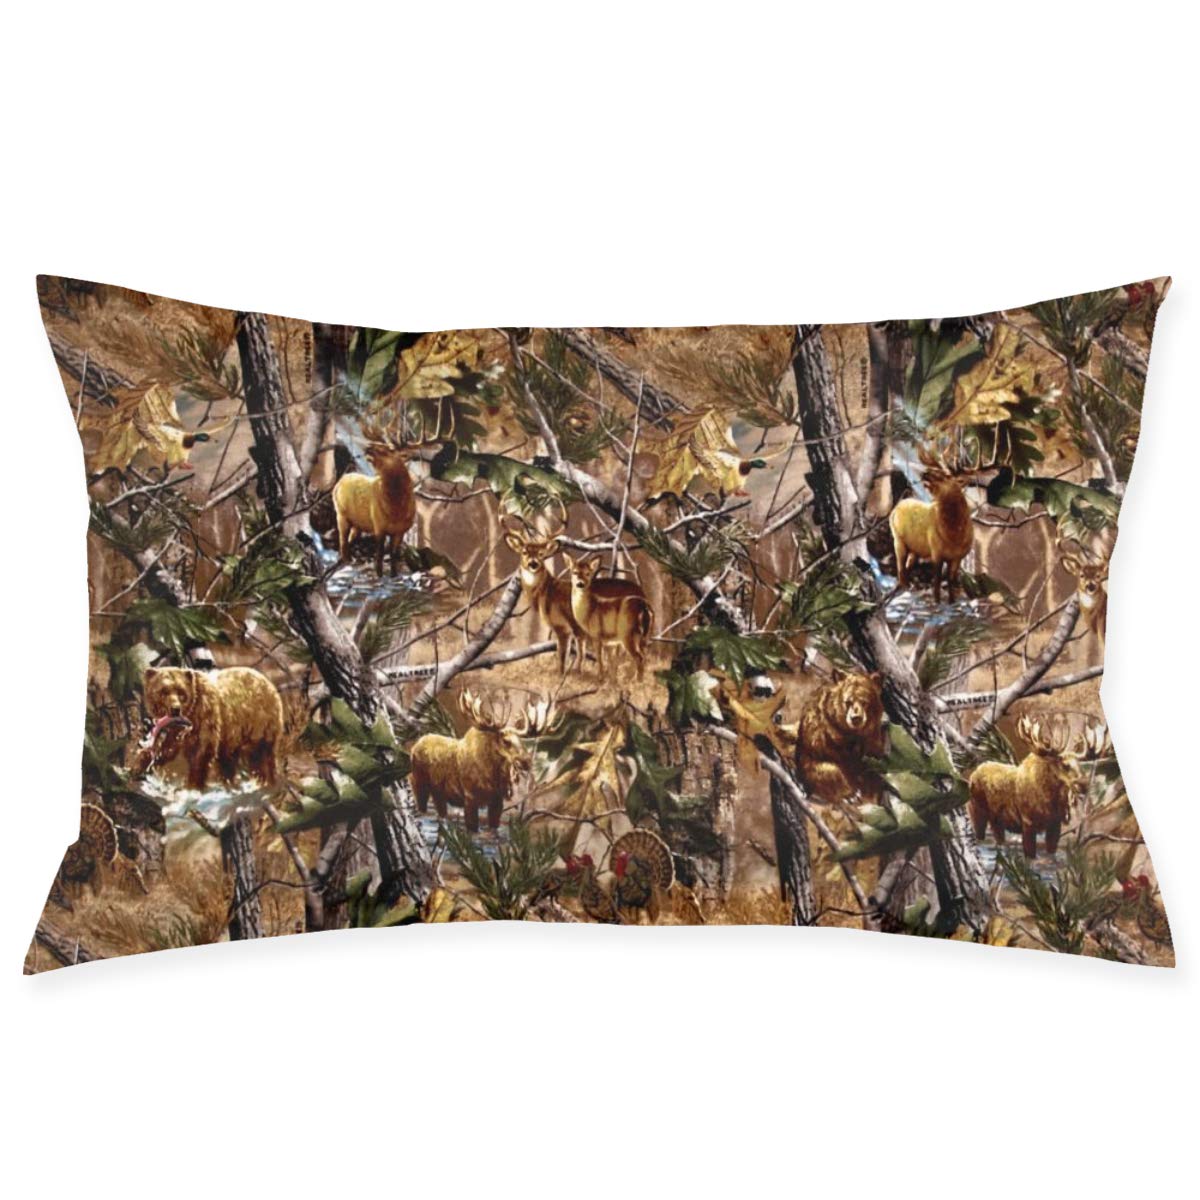 Book Cover Camo Hunting Deer Bear Moose Turkey Duck Pillowcases Decorative Pillow Covers Soft and Cozy, Standard Size 20